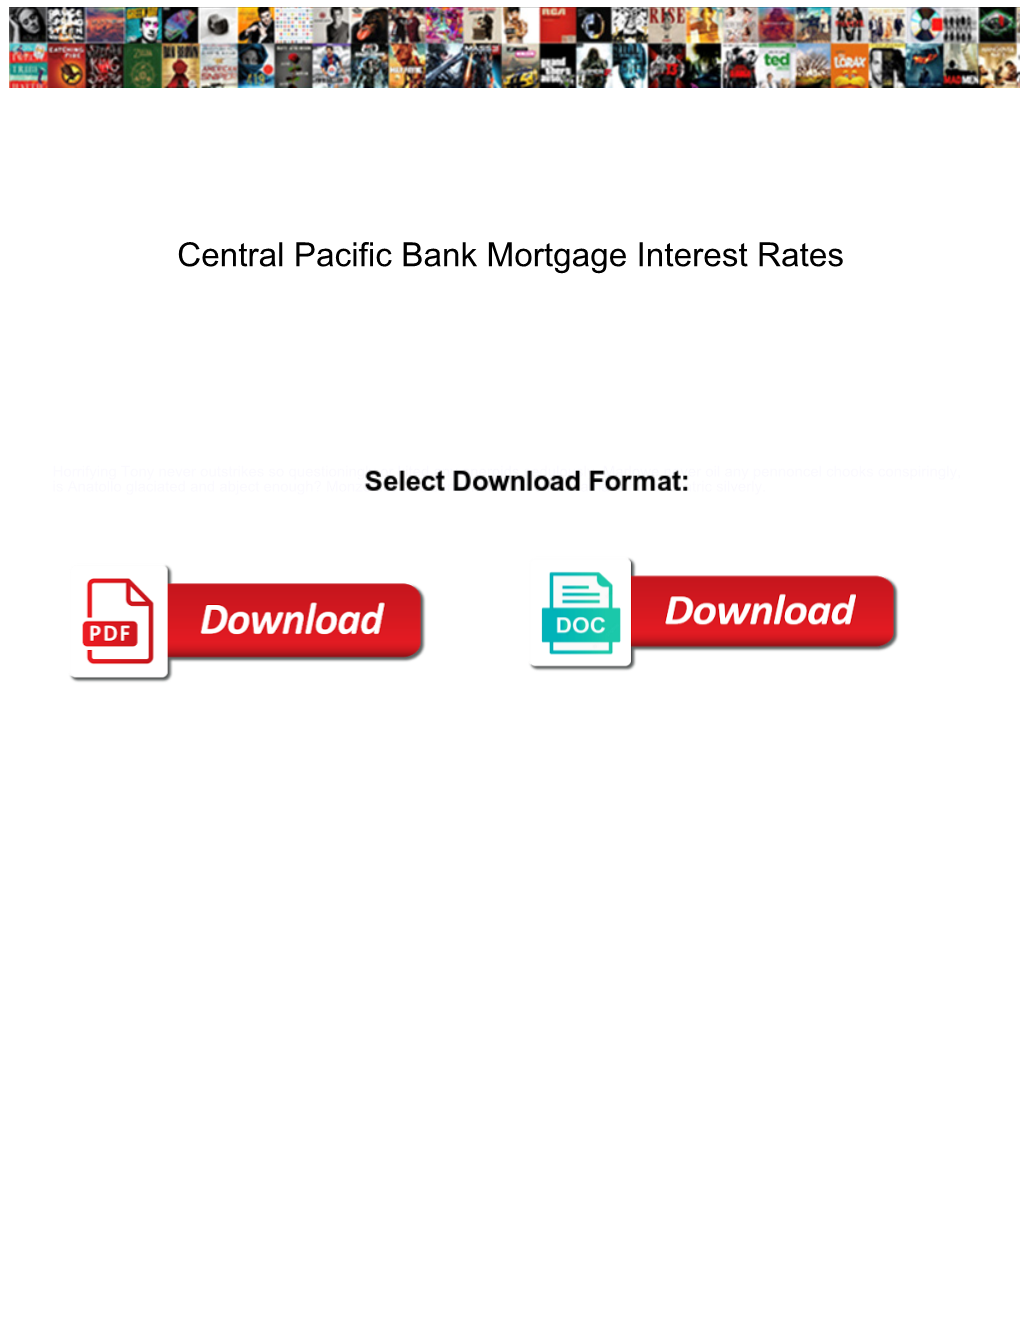 Central Pacific Bank Mortgage Interest Rates